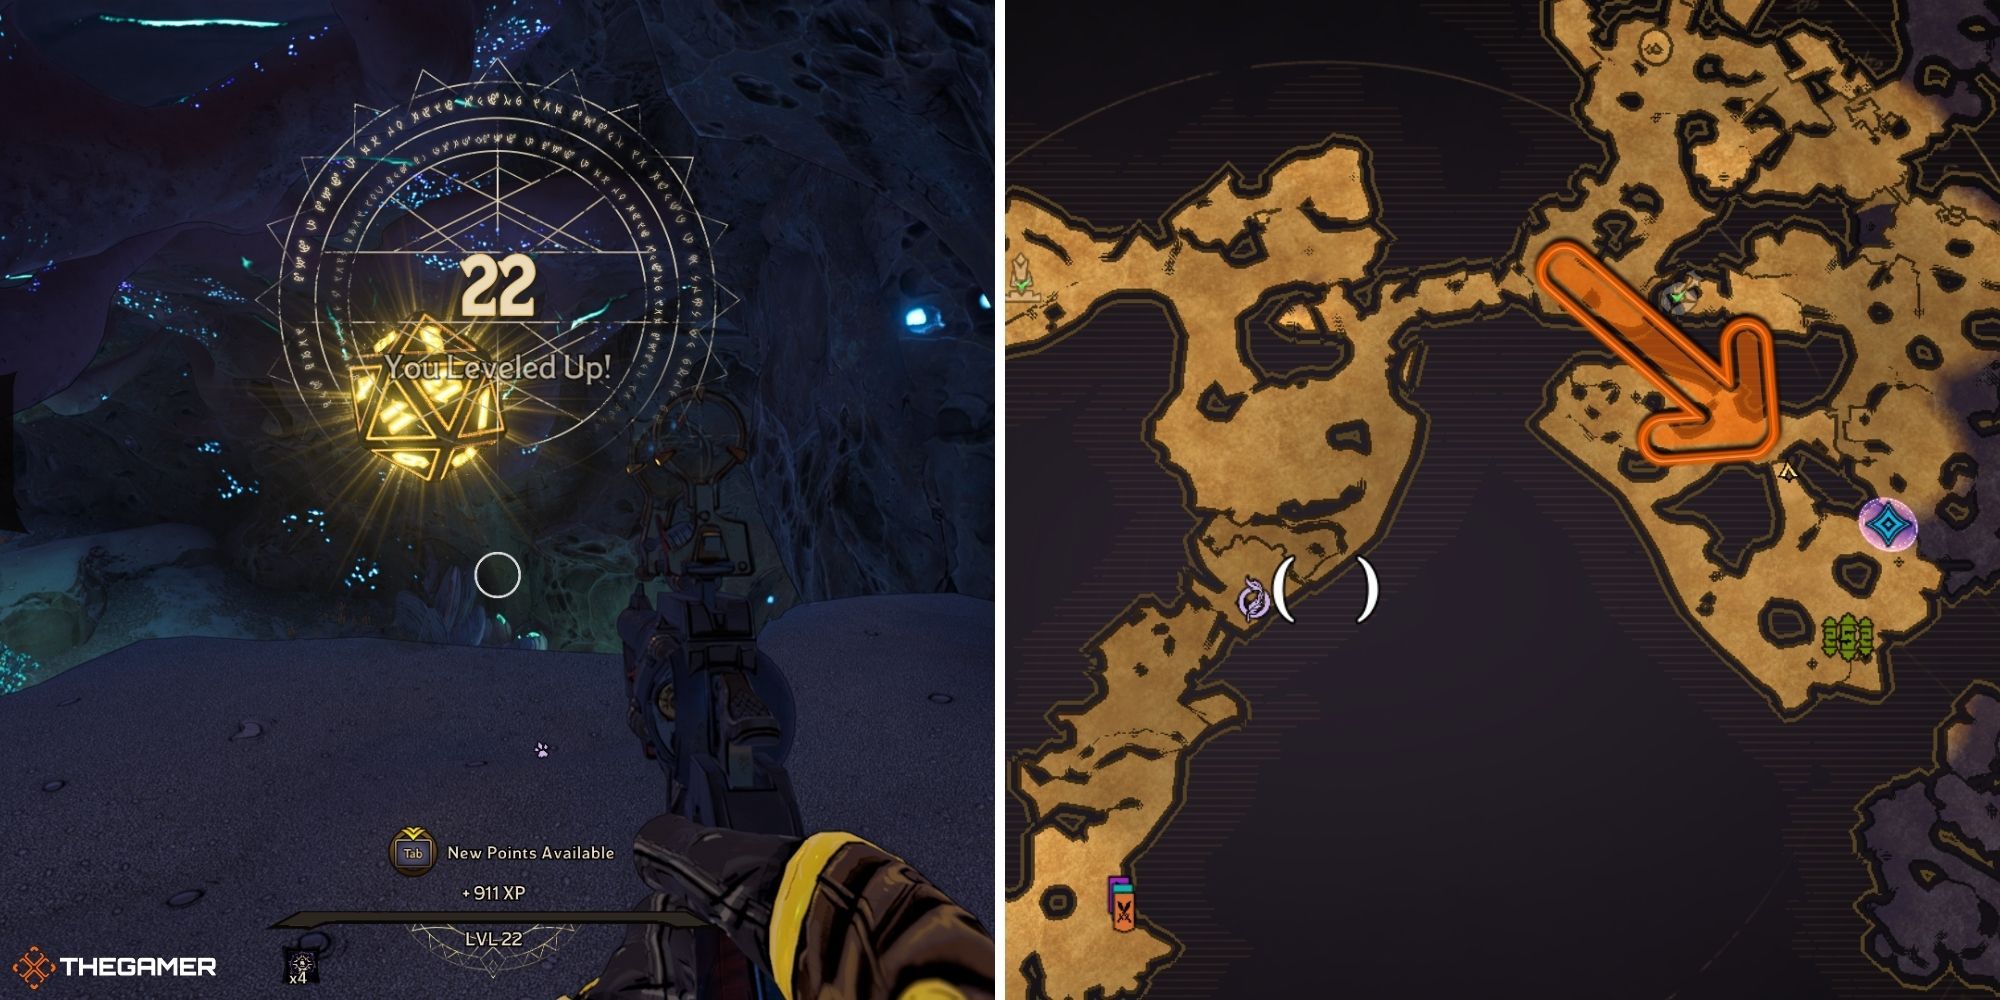 tiny tina's wonderlands - Wargtooth Shallow - lucky die on left, map on right (2)